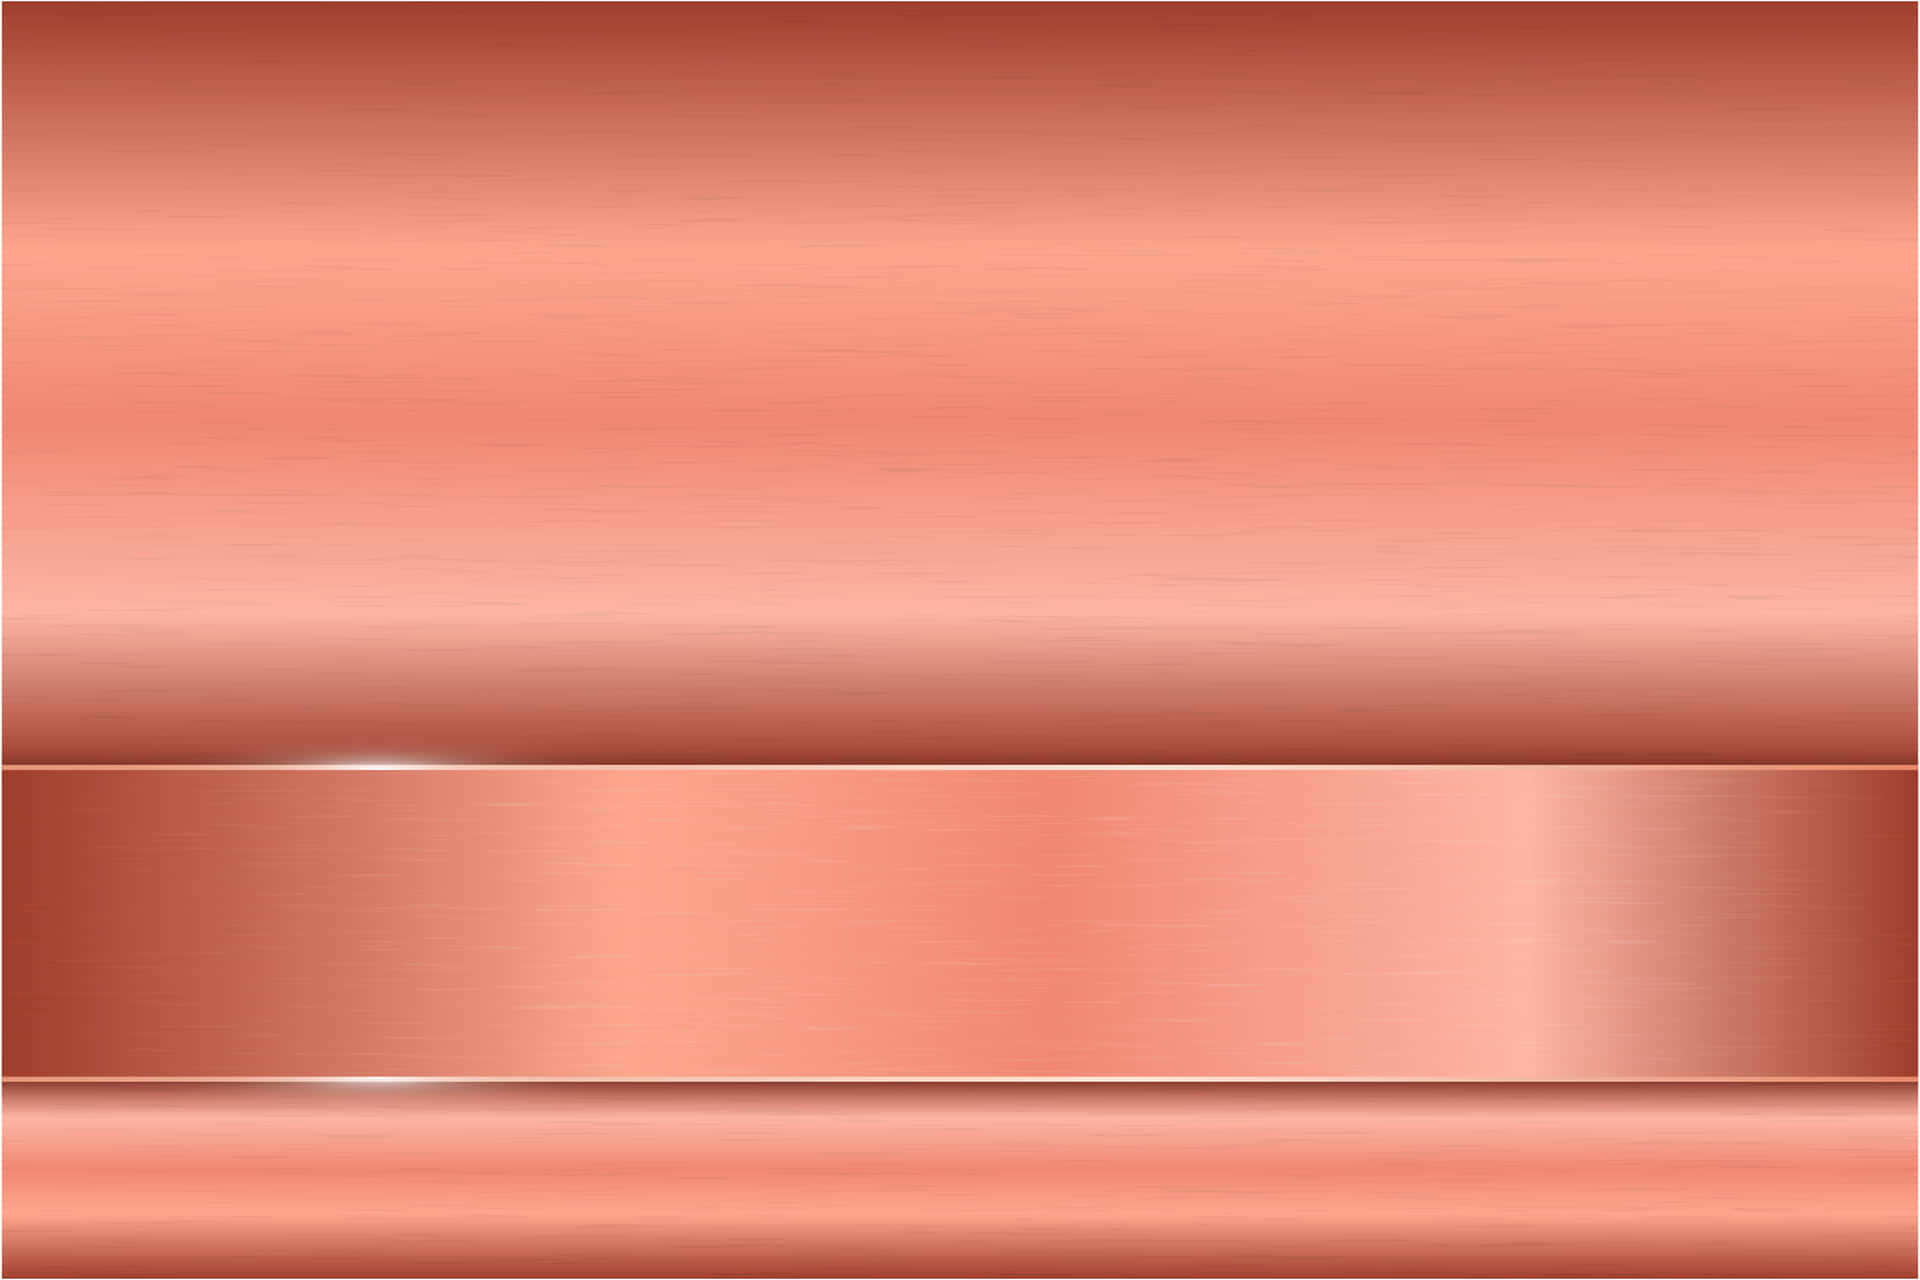 A Copper Background With A Shiny Texture